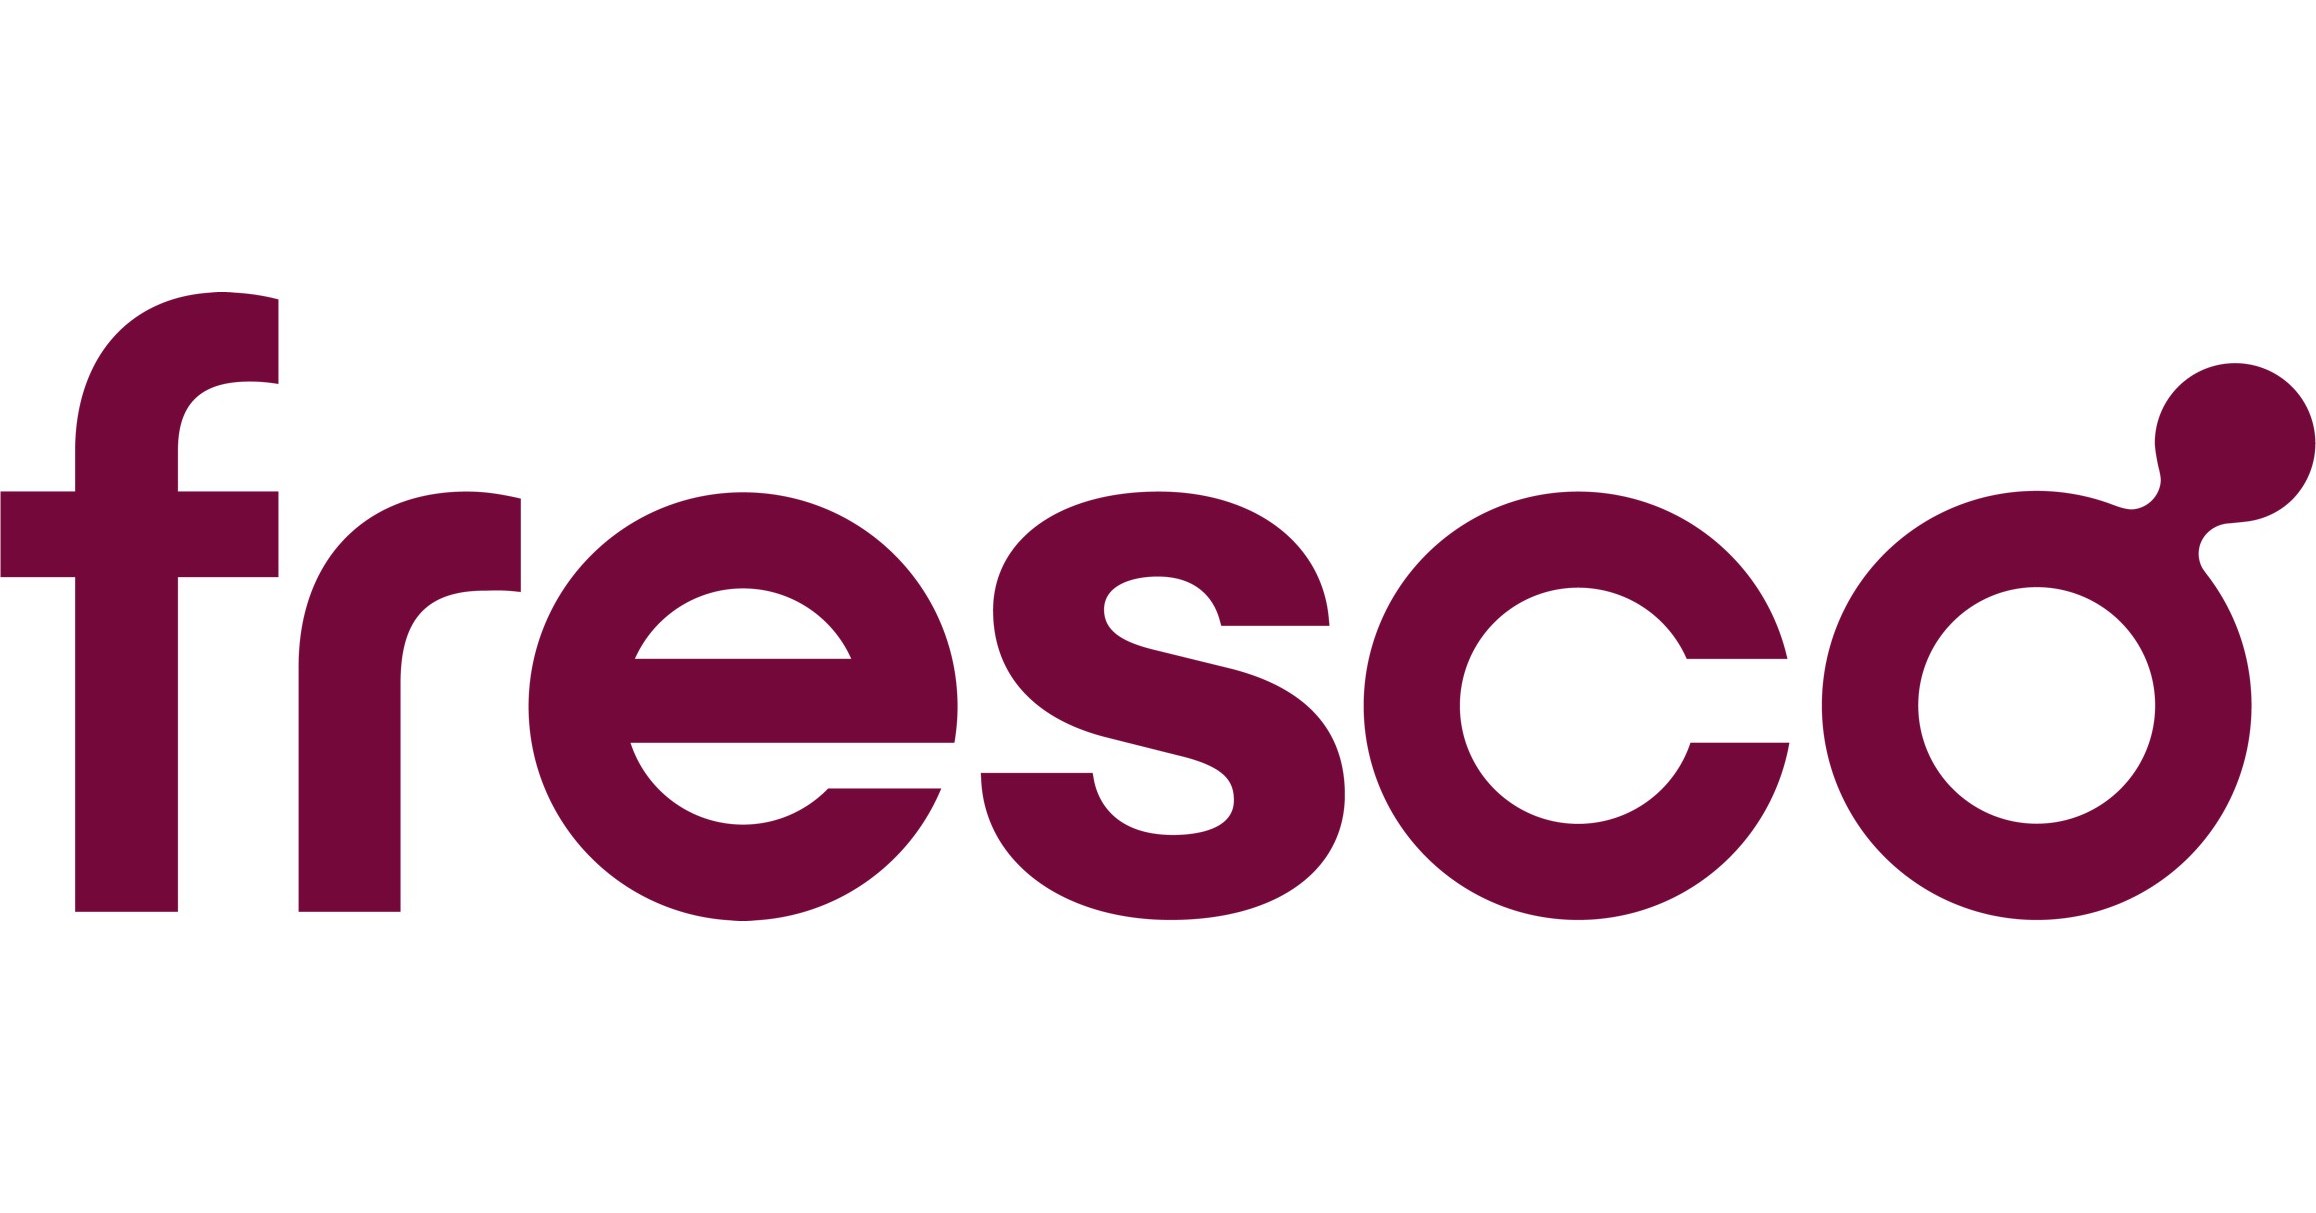 Fresco Joins the Connectivity Standards Alliance to Help Define Matter's Connected Kitchen Standards